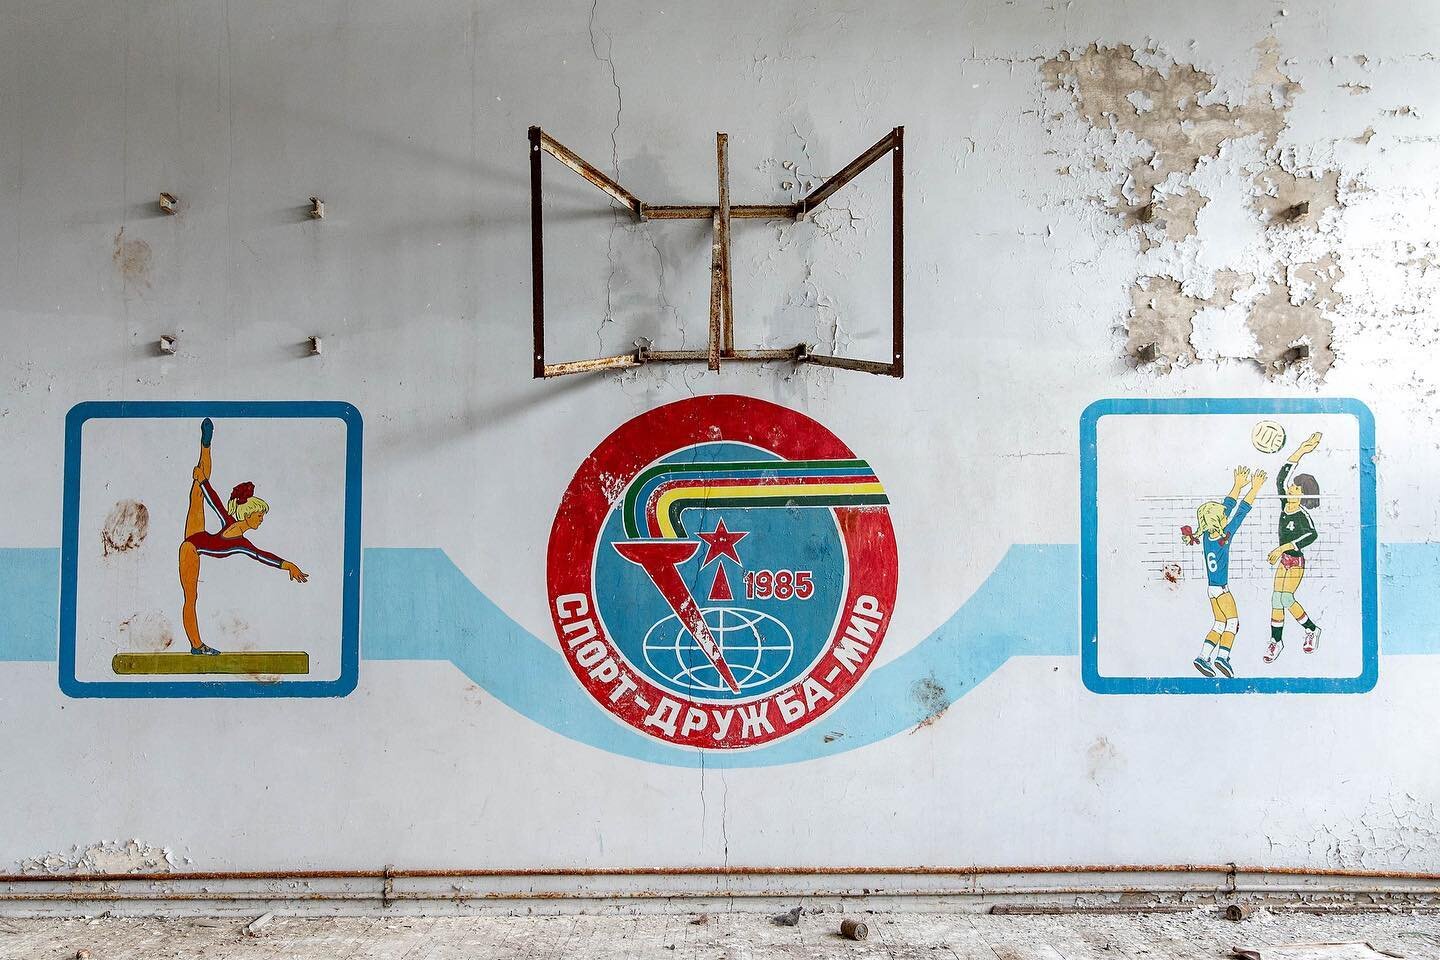 Pripyat Middle School No. 4, Chernobyl Exclusion Zone.

Nice and lovely details are still in good condition at the gym. February 2020.

#chernobyl #pripyat #abandoned #urbex #radioactive #chernobylzone #radiation #abandonedplaces #exclusionzone #chor